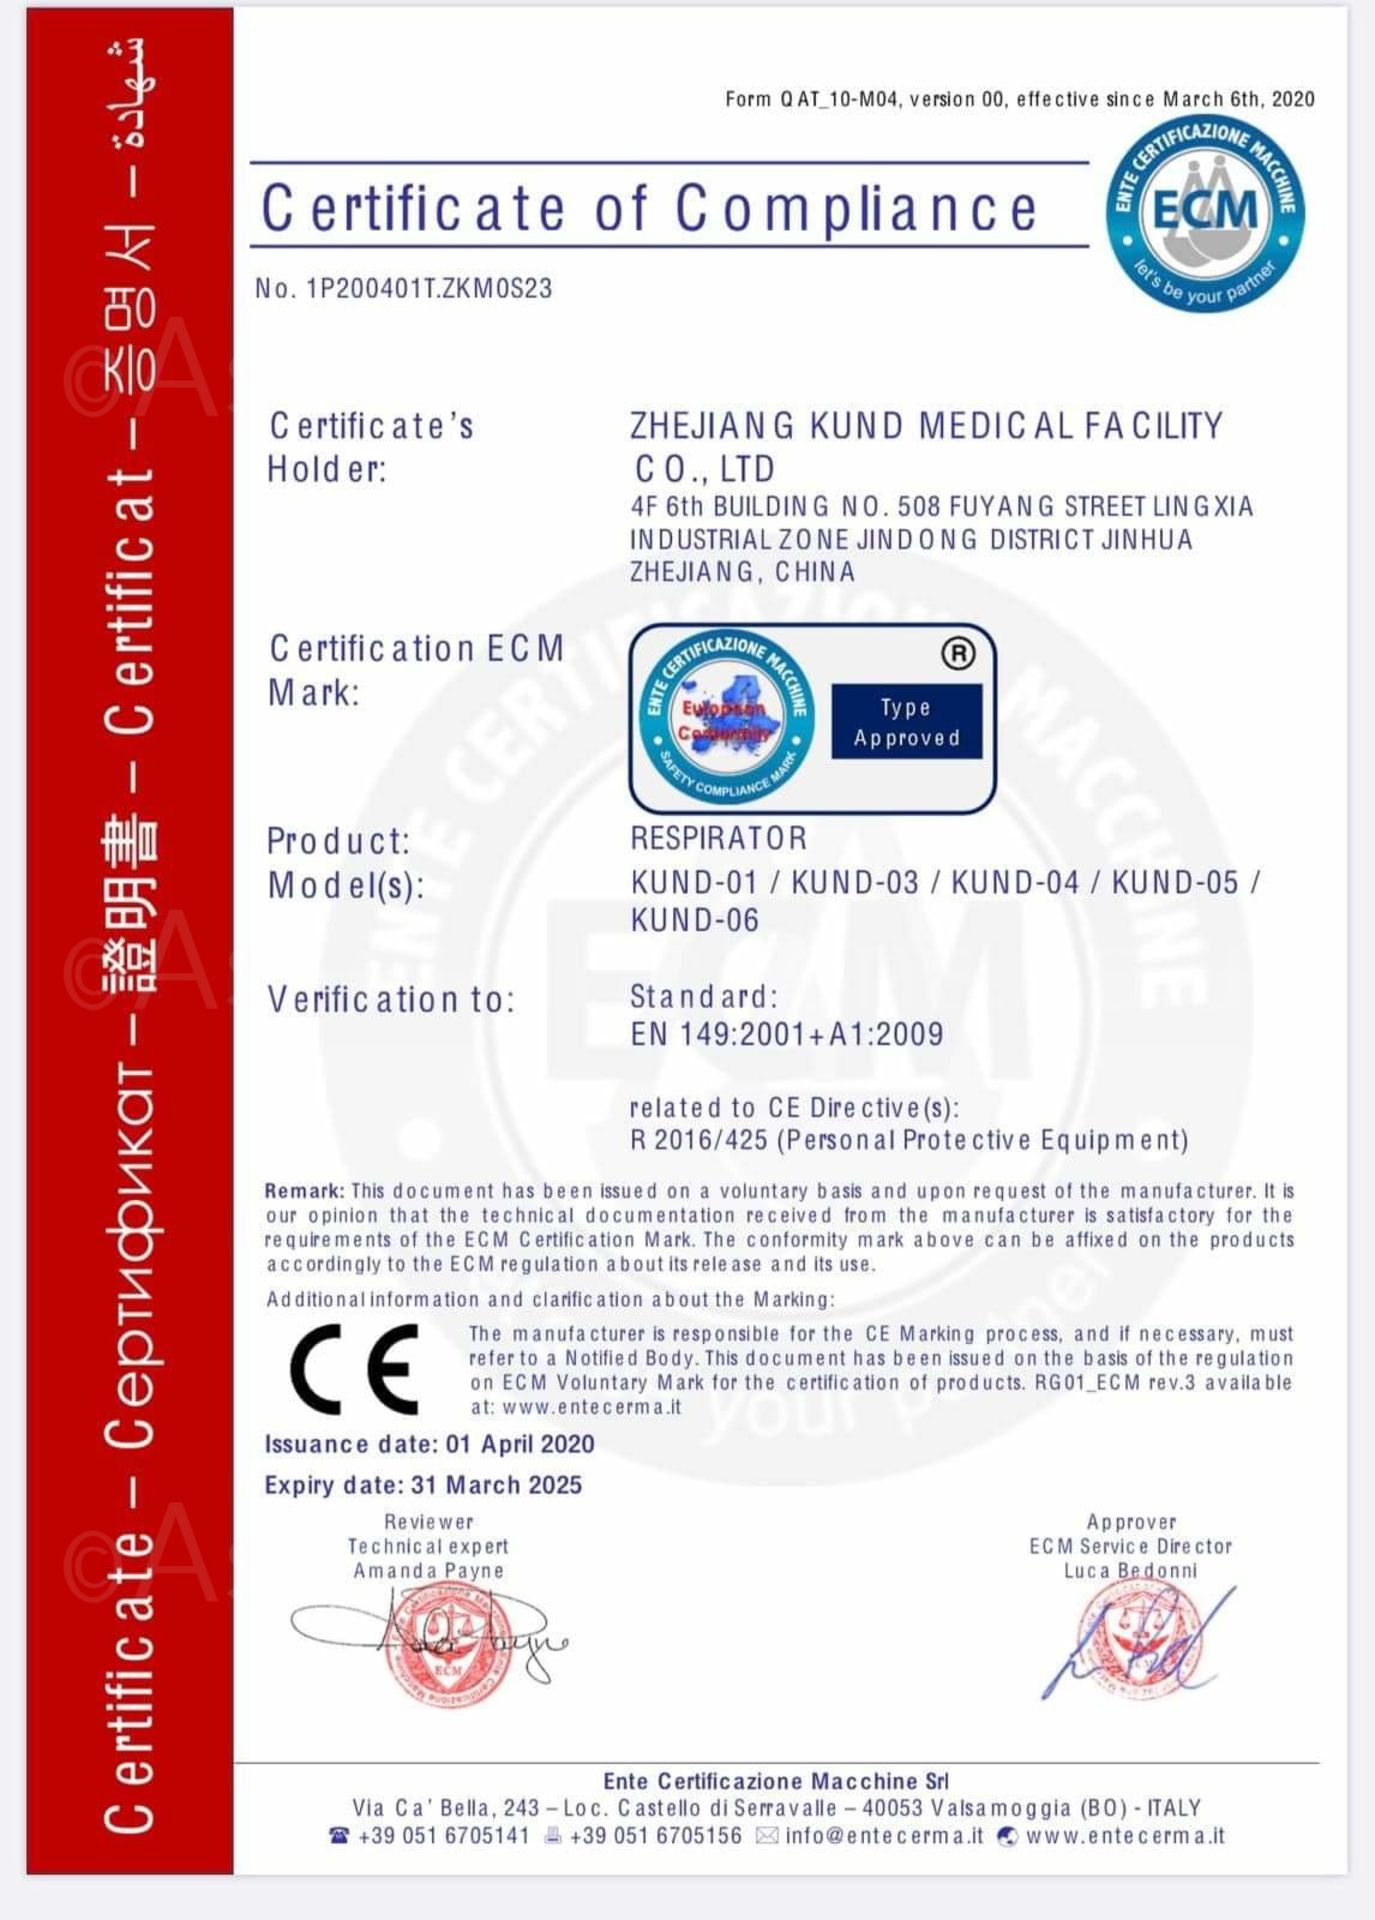 5000 KN95 FILTERED FACE MASKS, BRAND NEW WITH TAGS AND CE MARK CERTIFIED *PLUS VAT* - Image 2 of 2